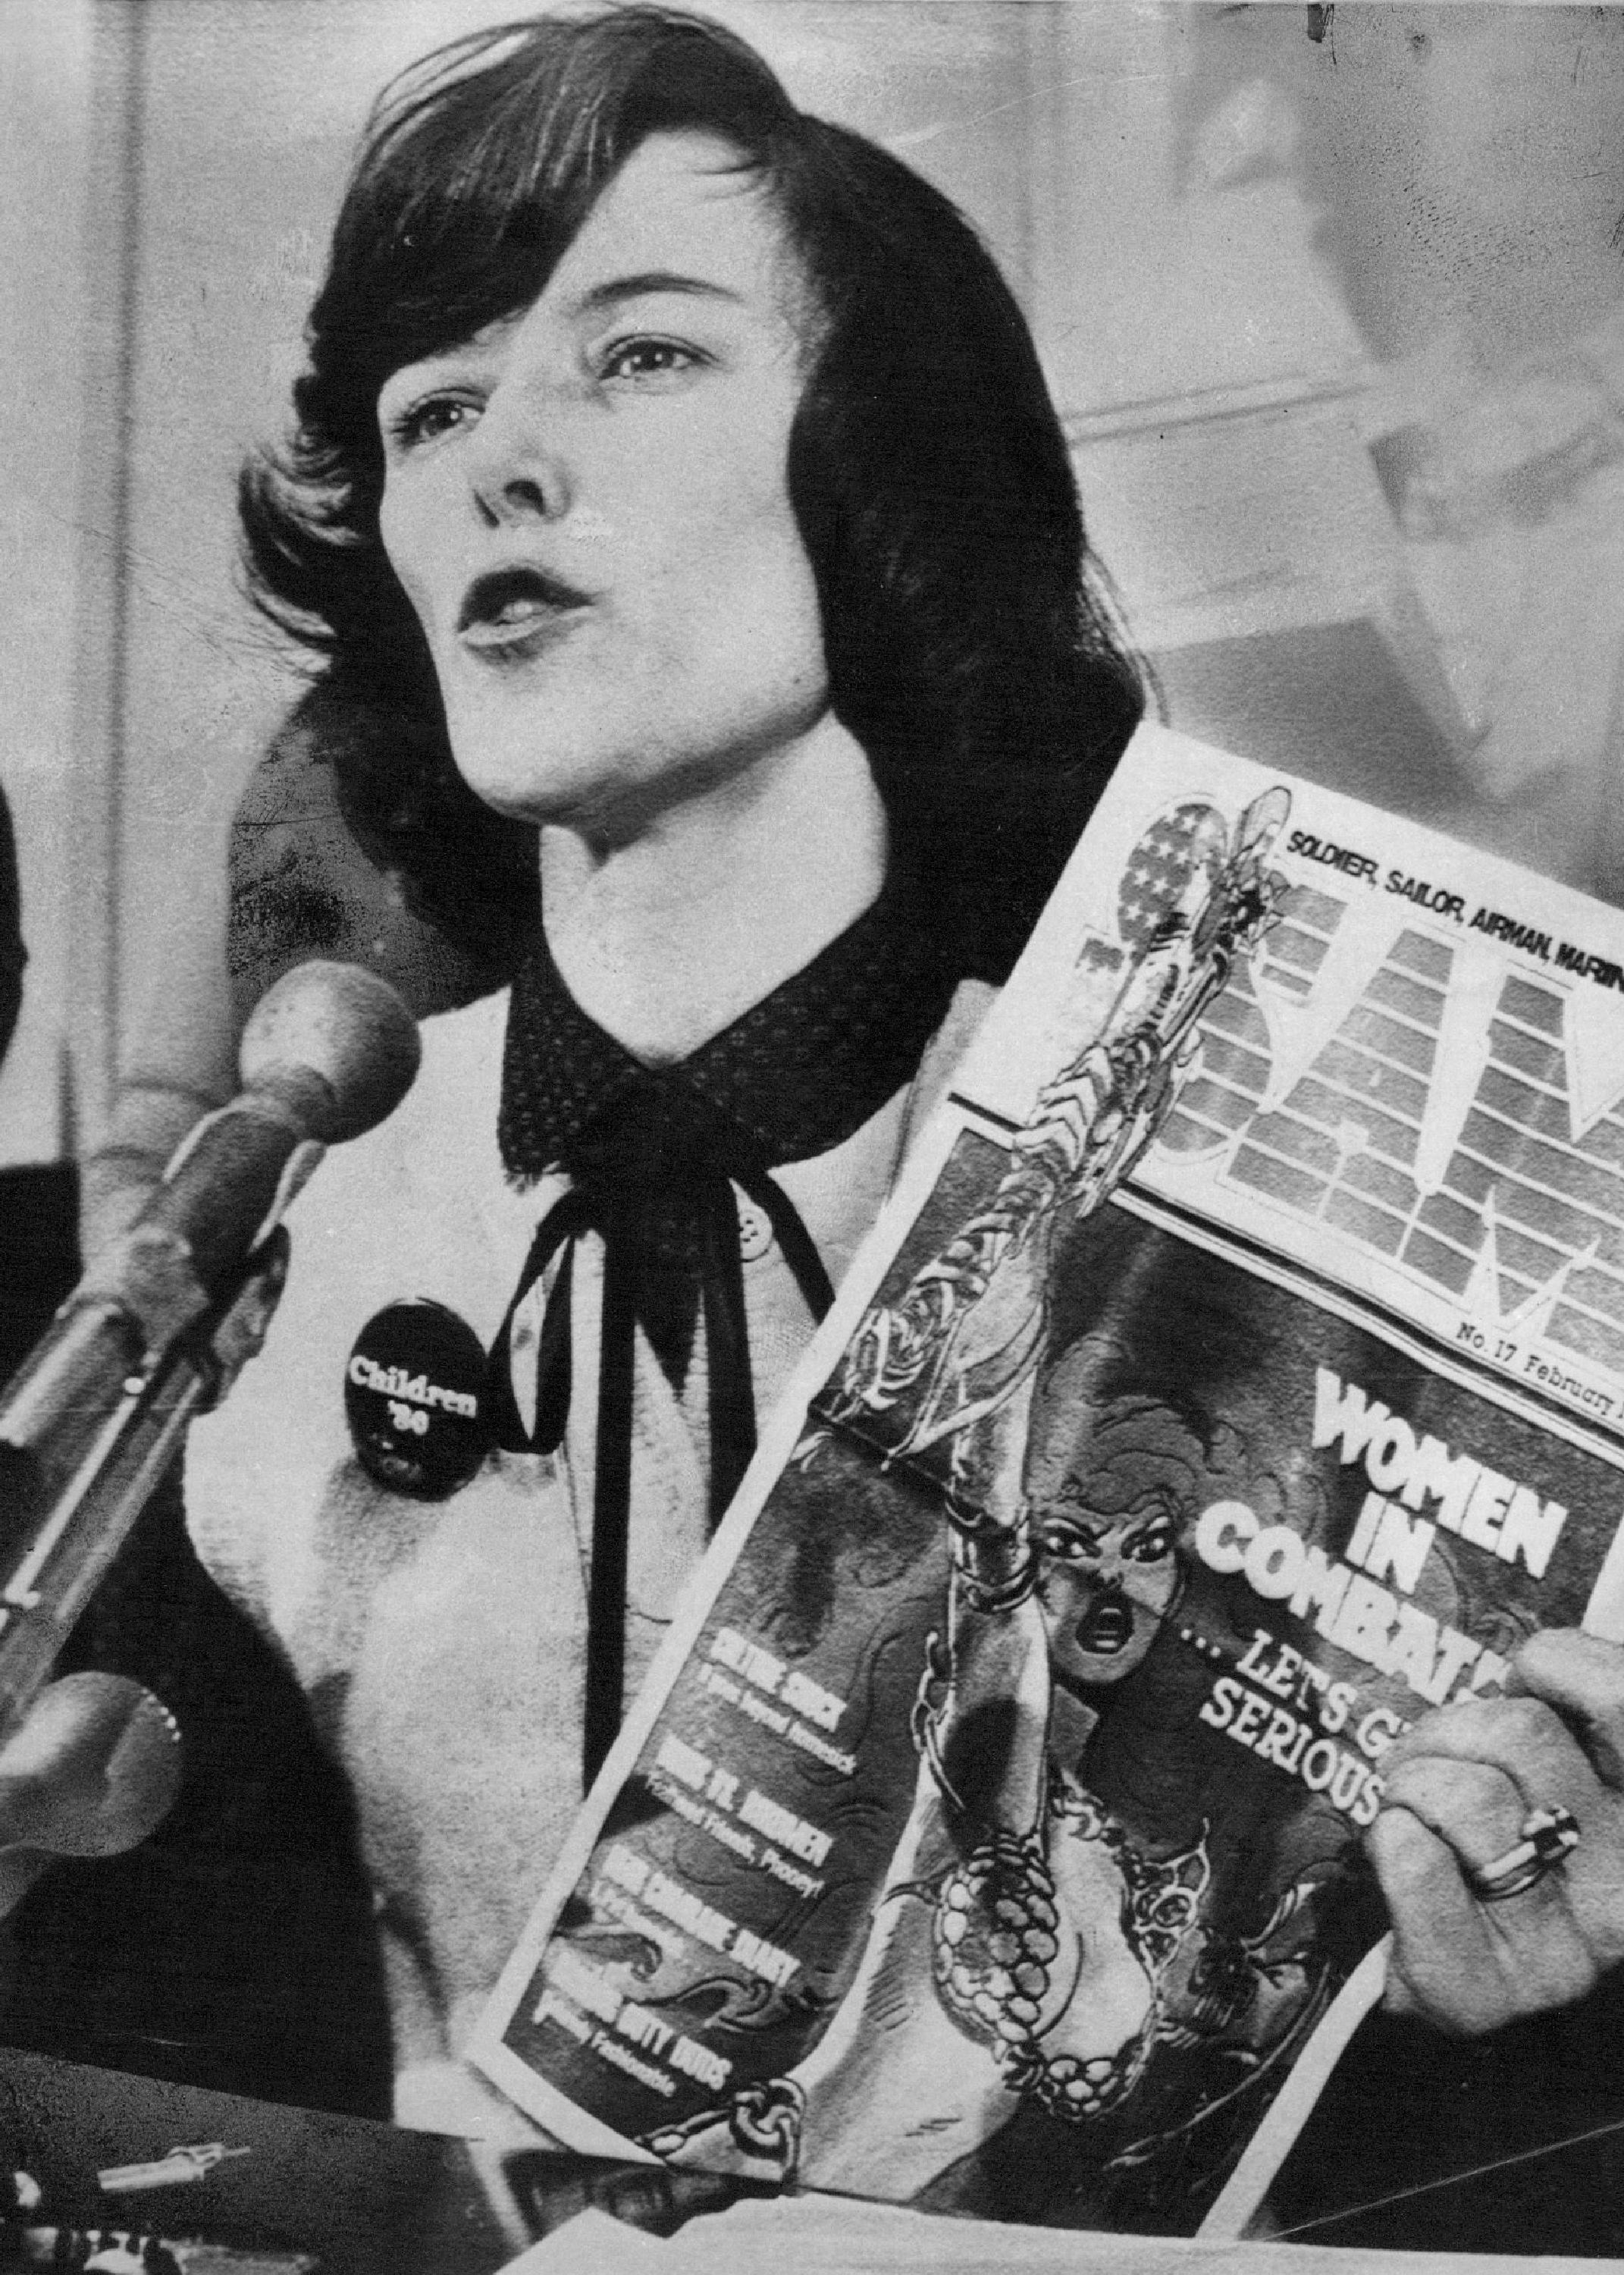 MAR 13 1980, DEC 3 1981, DEC 4 1981; Rep. Pat Schroeder Holds Magazine; She used it as an example of Pentagon waste.; (Photo By The Denver Post via Getty Images)